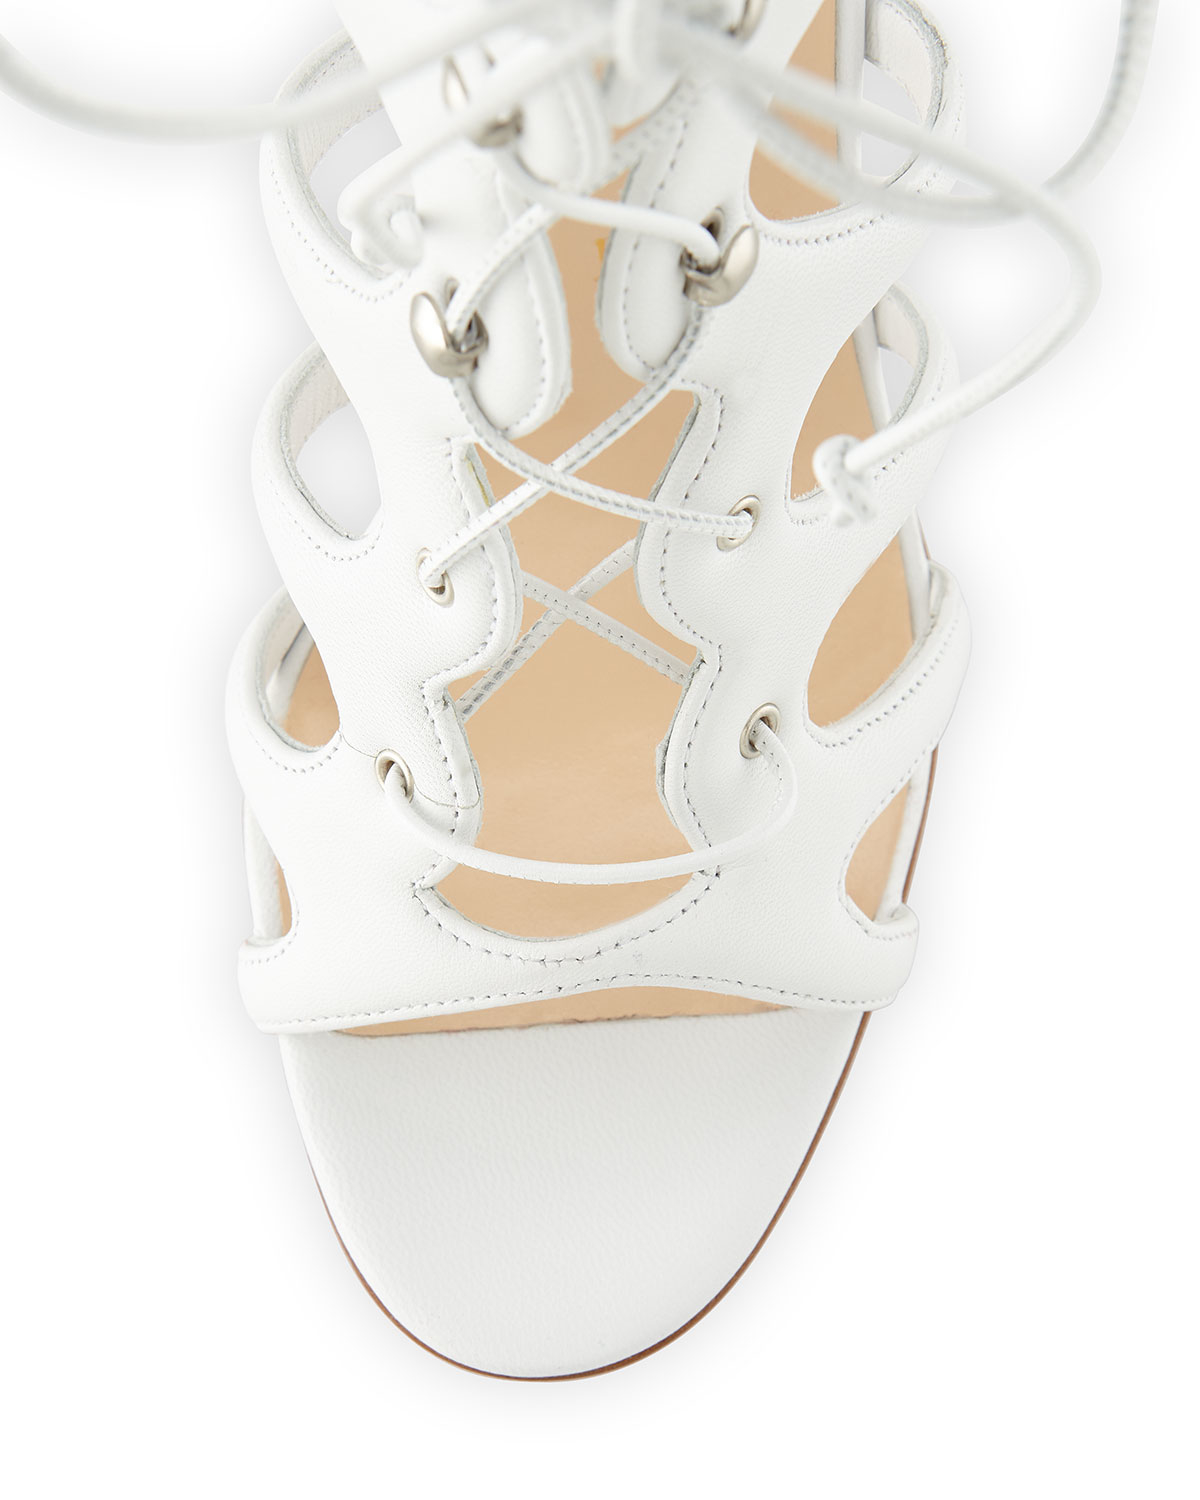 Christian louboutin Amazoula Lace-up Red Sole Sandal in White | Lyst